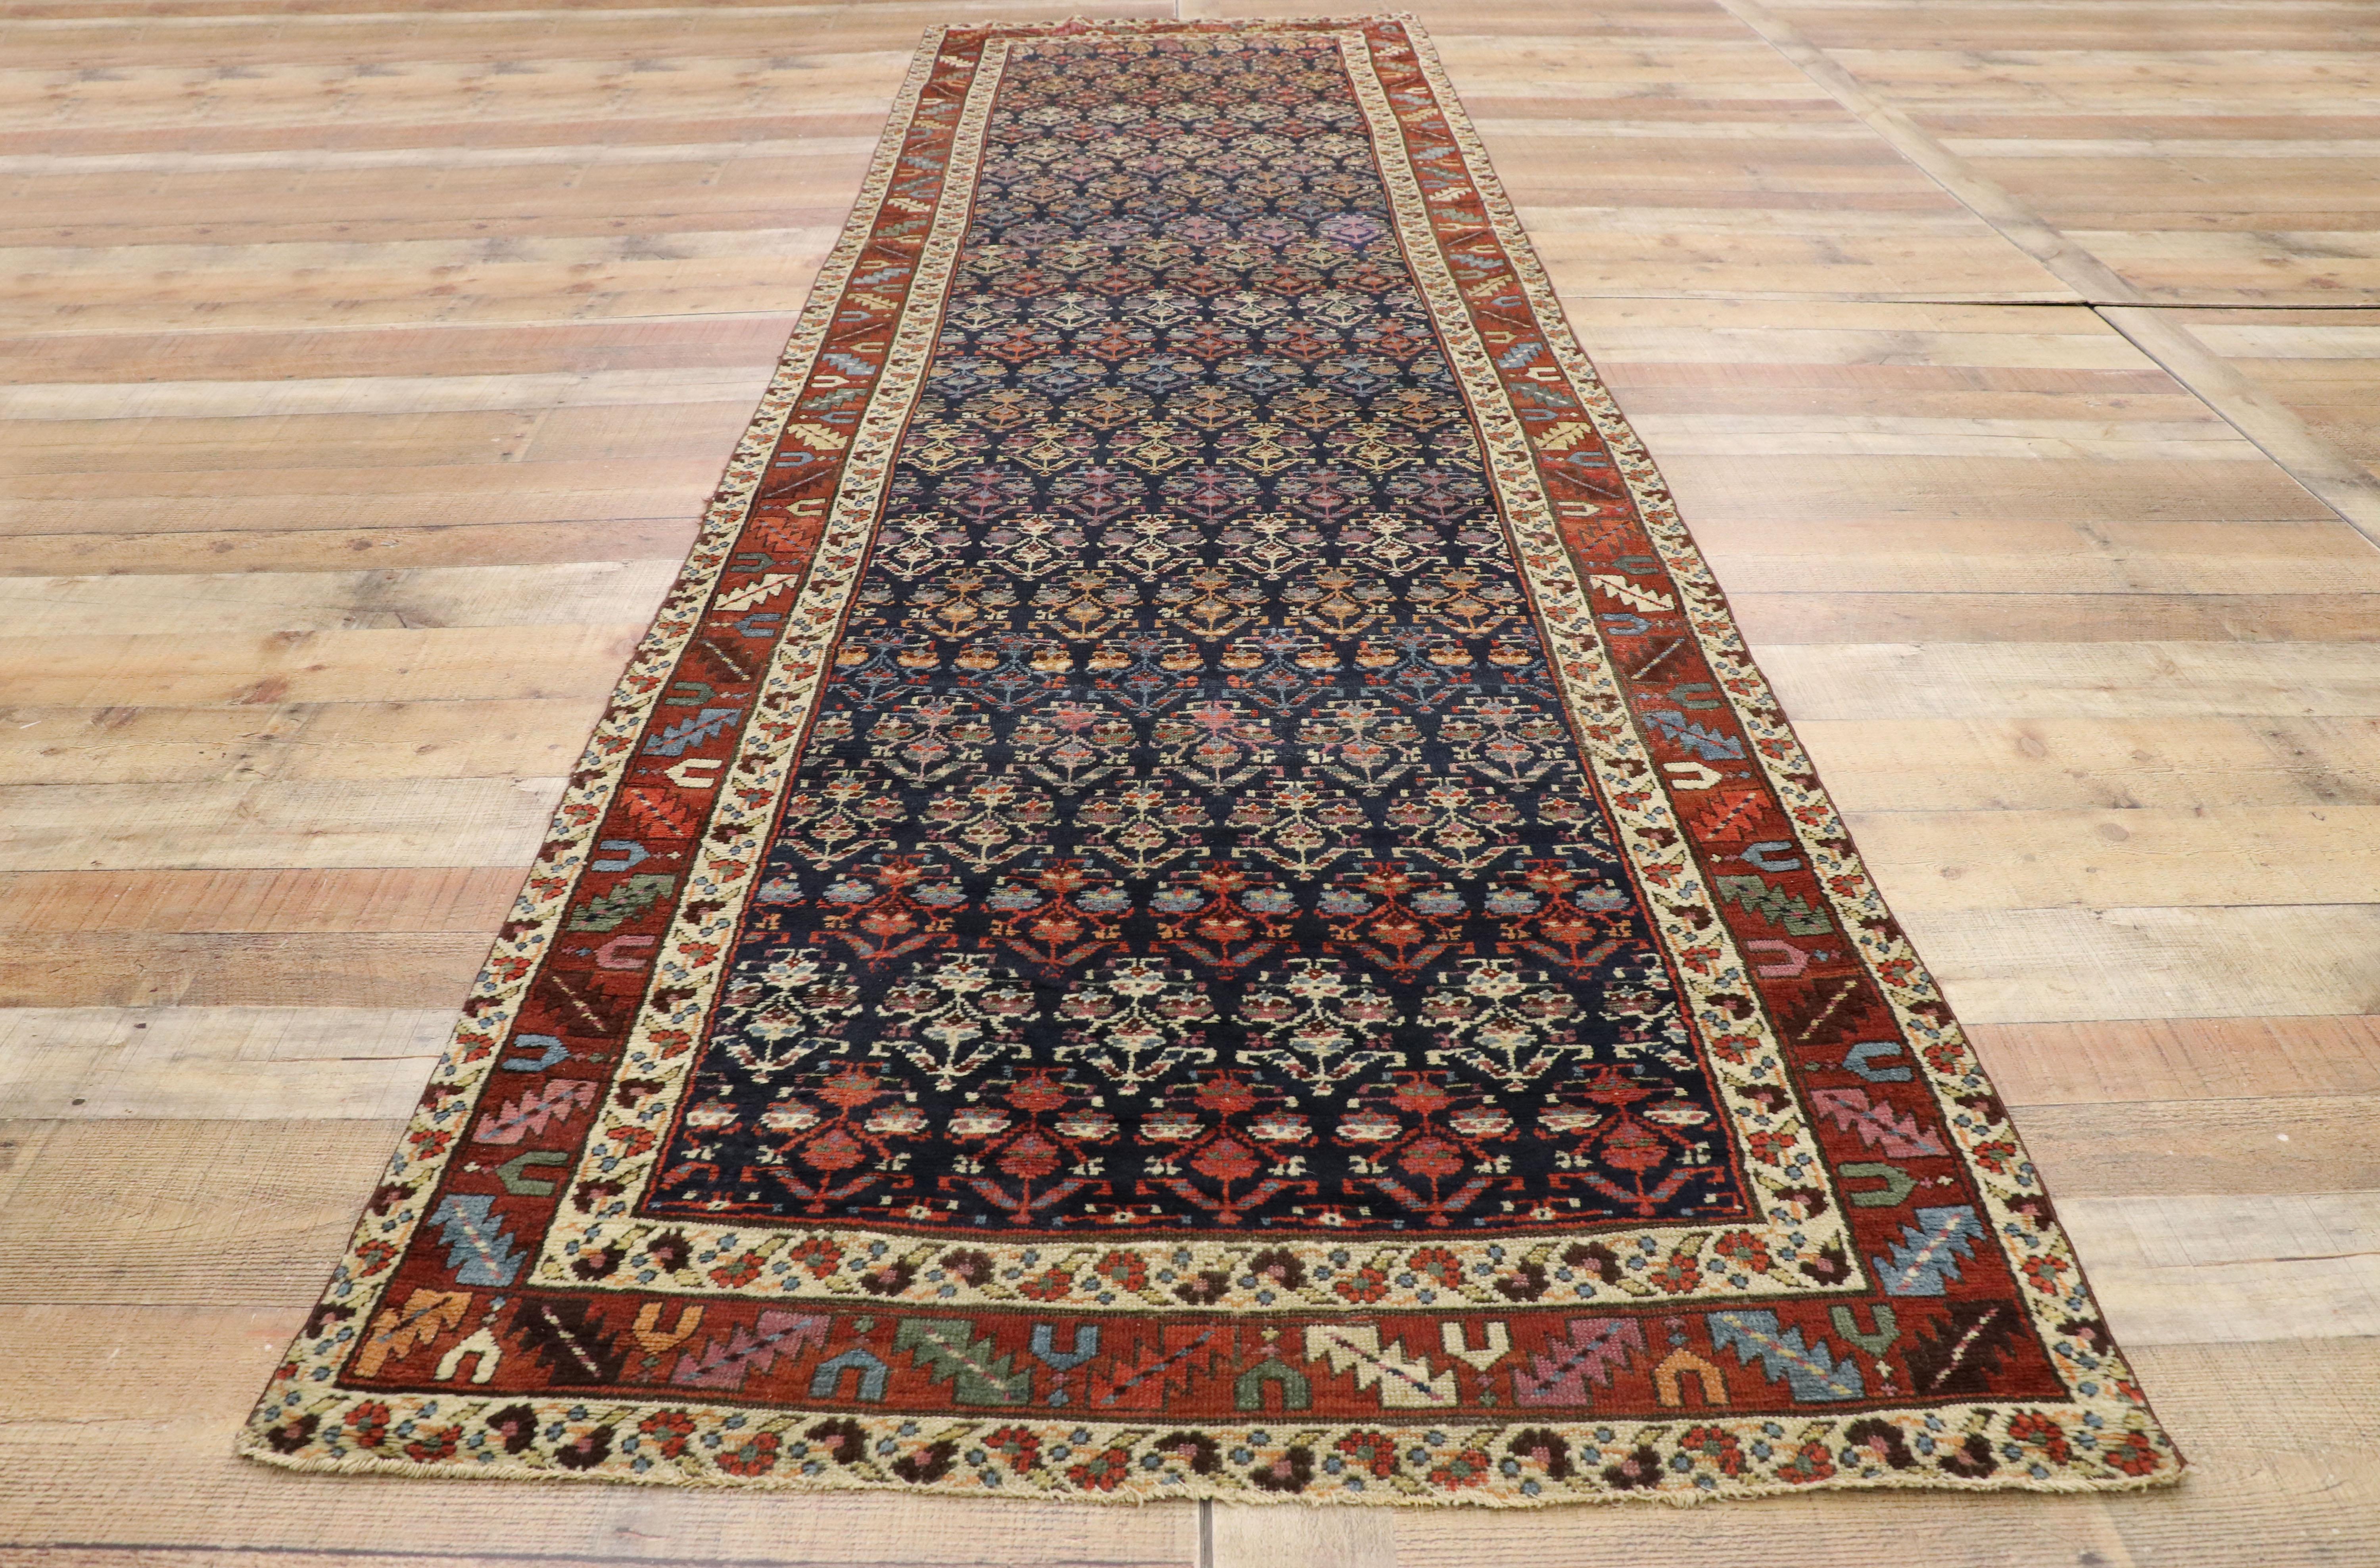 Antique Caucasian Shirvan Runner with Boteh Pattern and Modern Federal Style In Good Condition For Sale In Dallas, TX